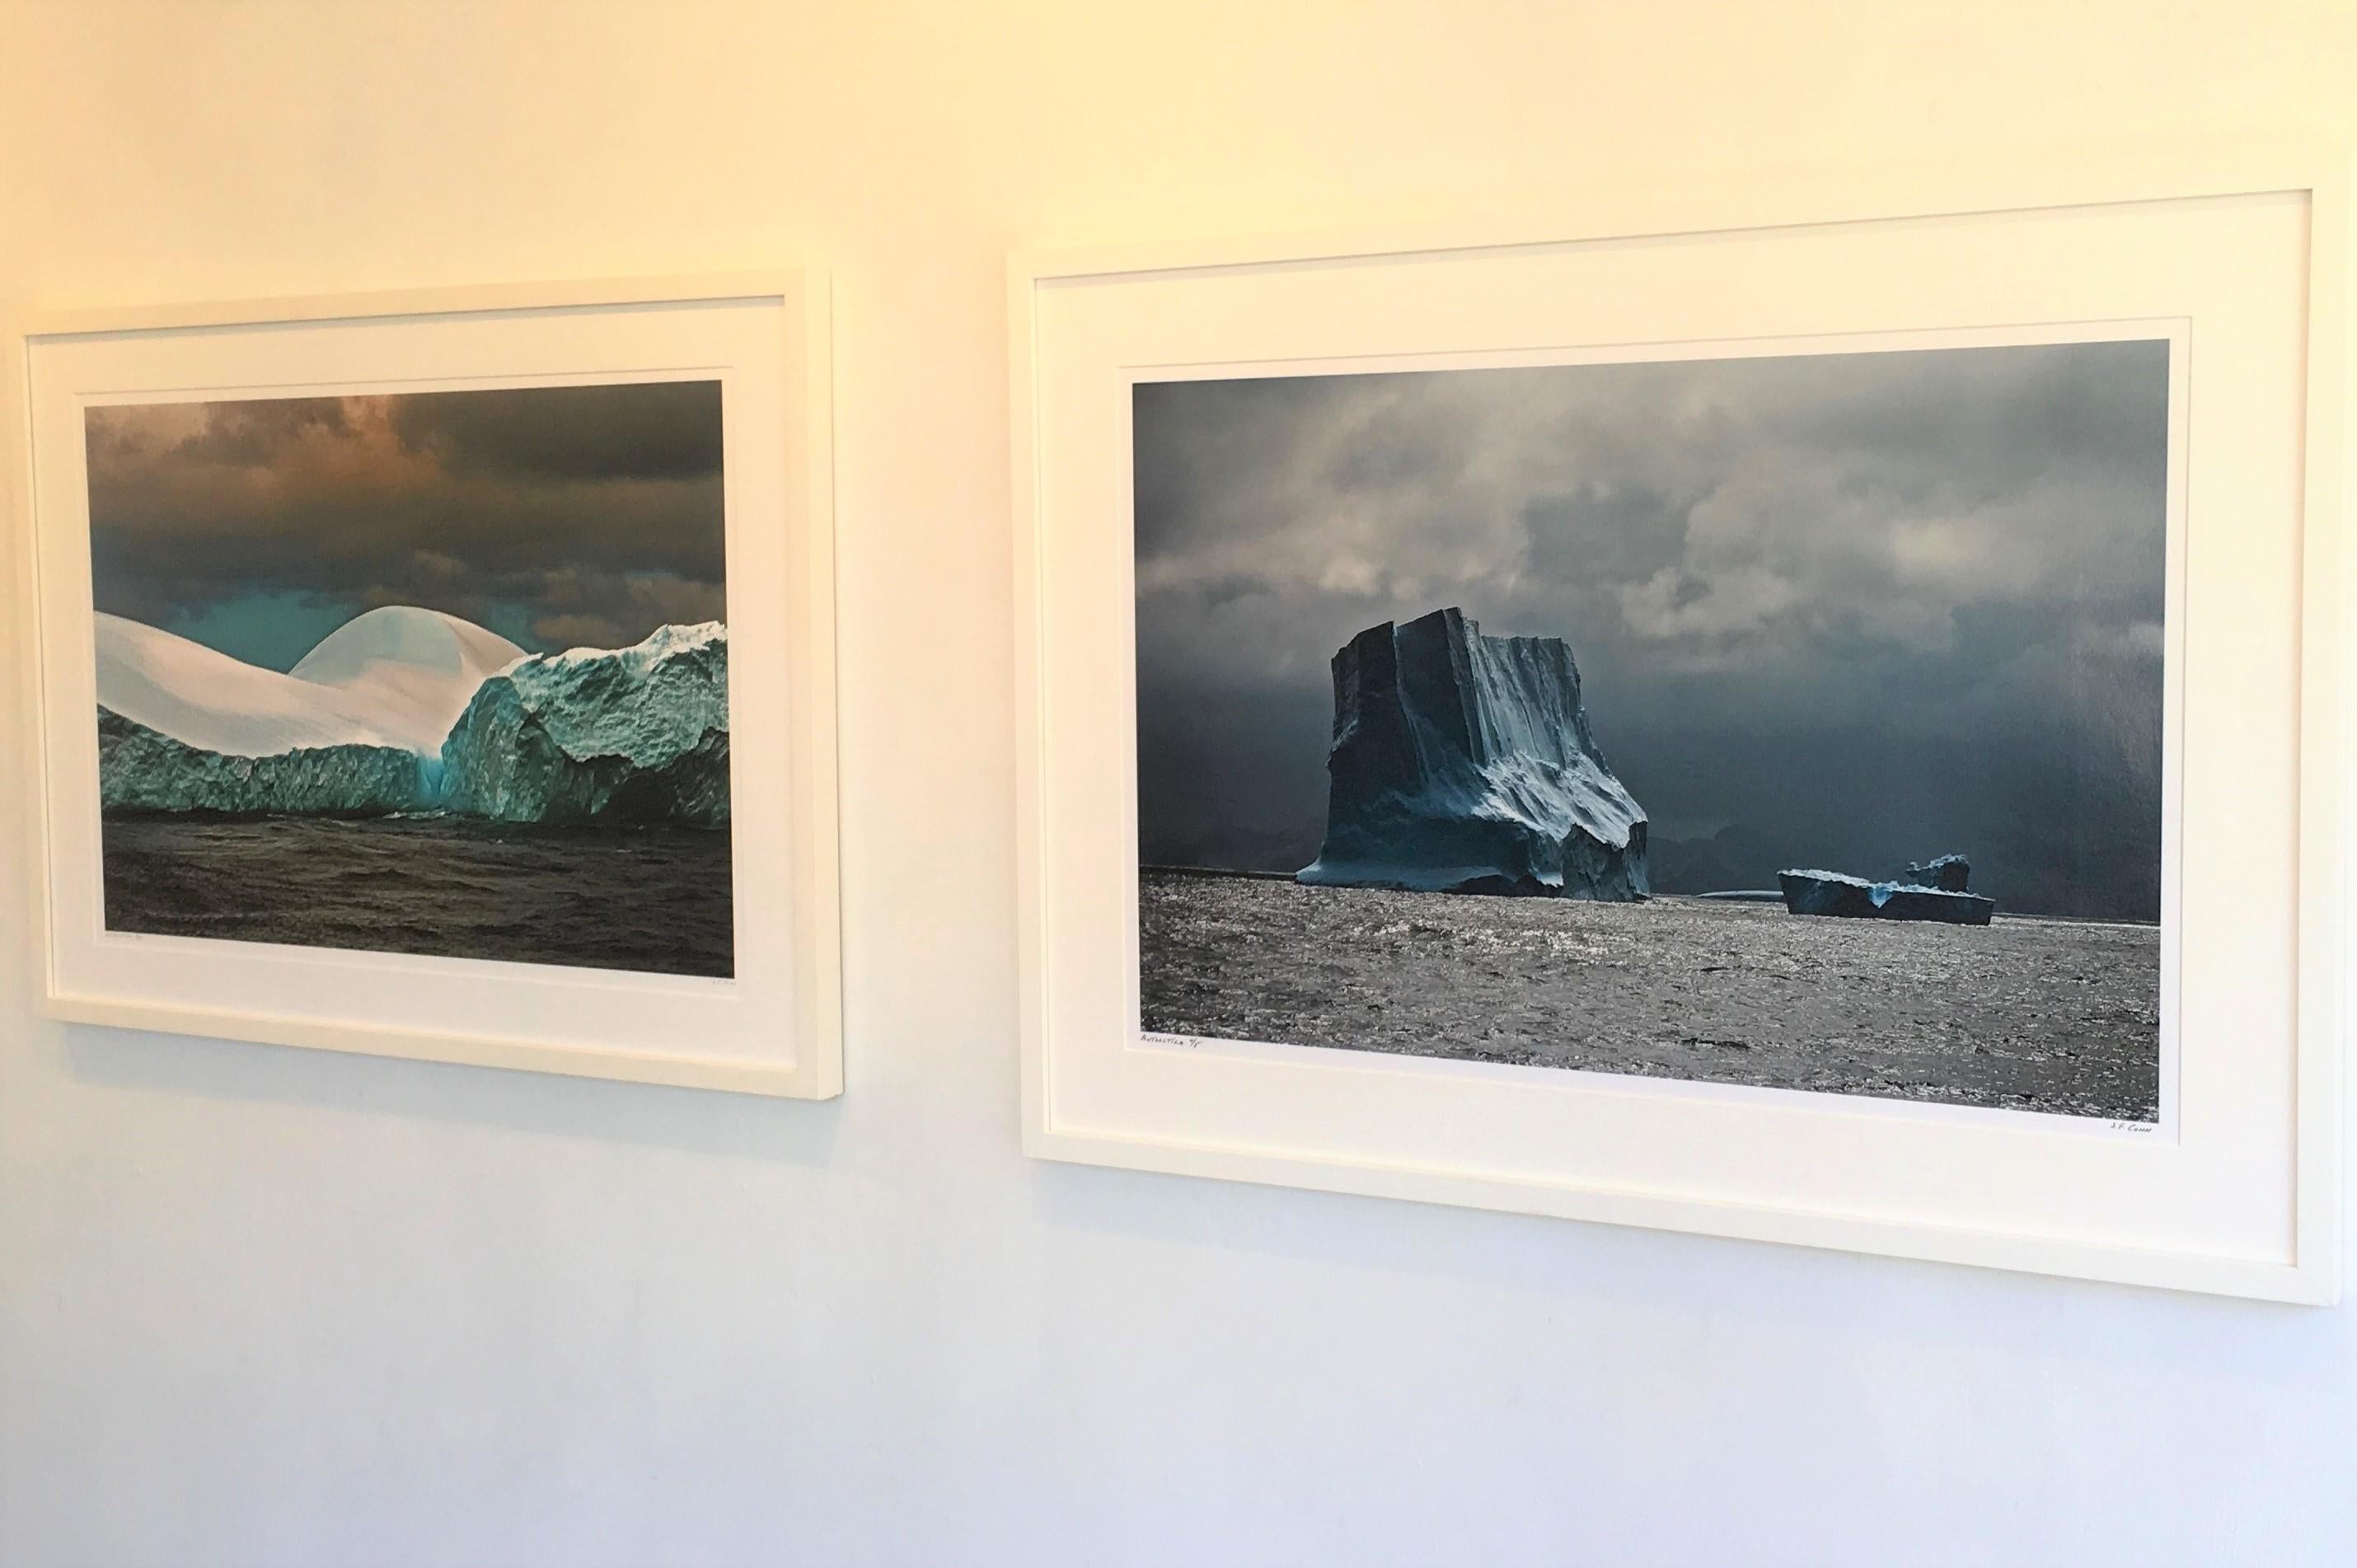 Arctic #5 is a limited edition photograph which is part of the Antarctica/Patagonia Series by John Conn taken in 2010.  The image is 20x30 printed on 24x36 archival paper.  It is currently unframed.  It is an edition of 10. The photograph is